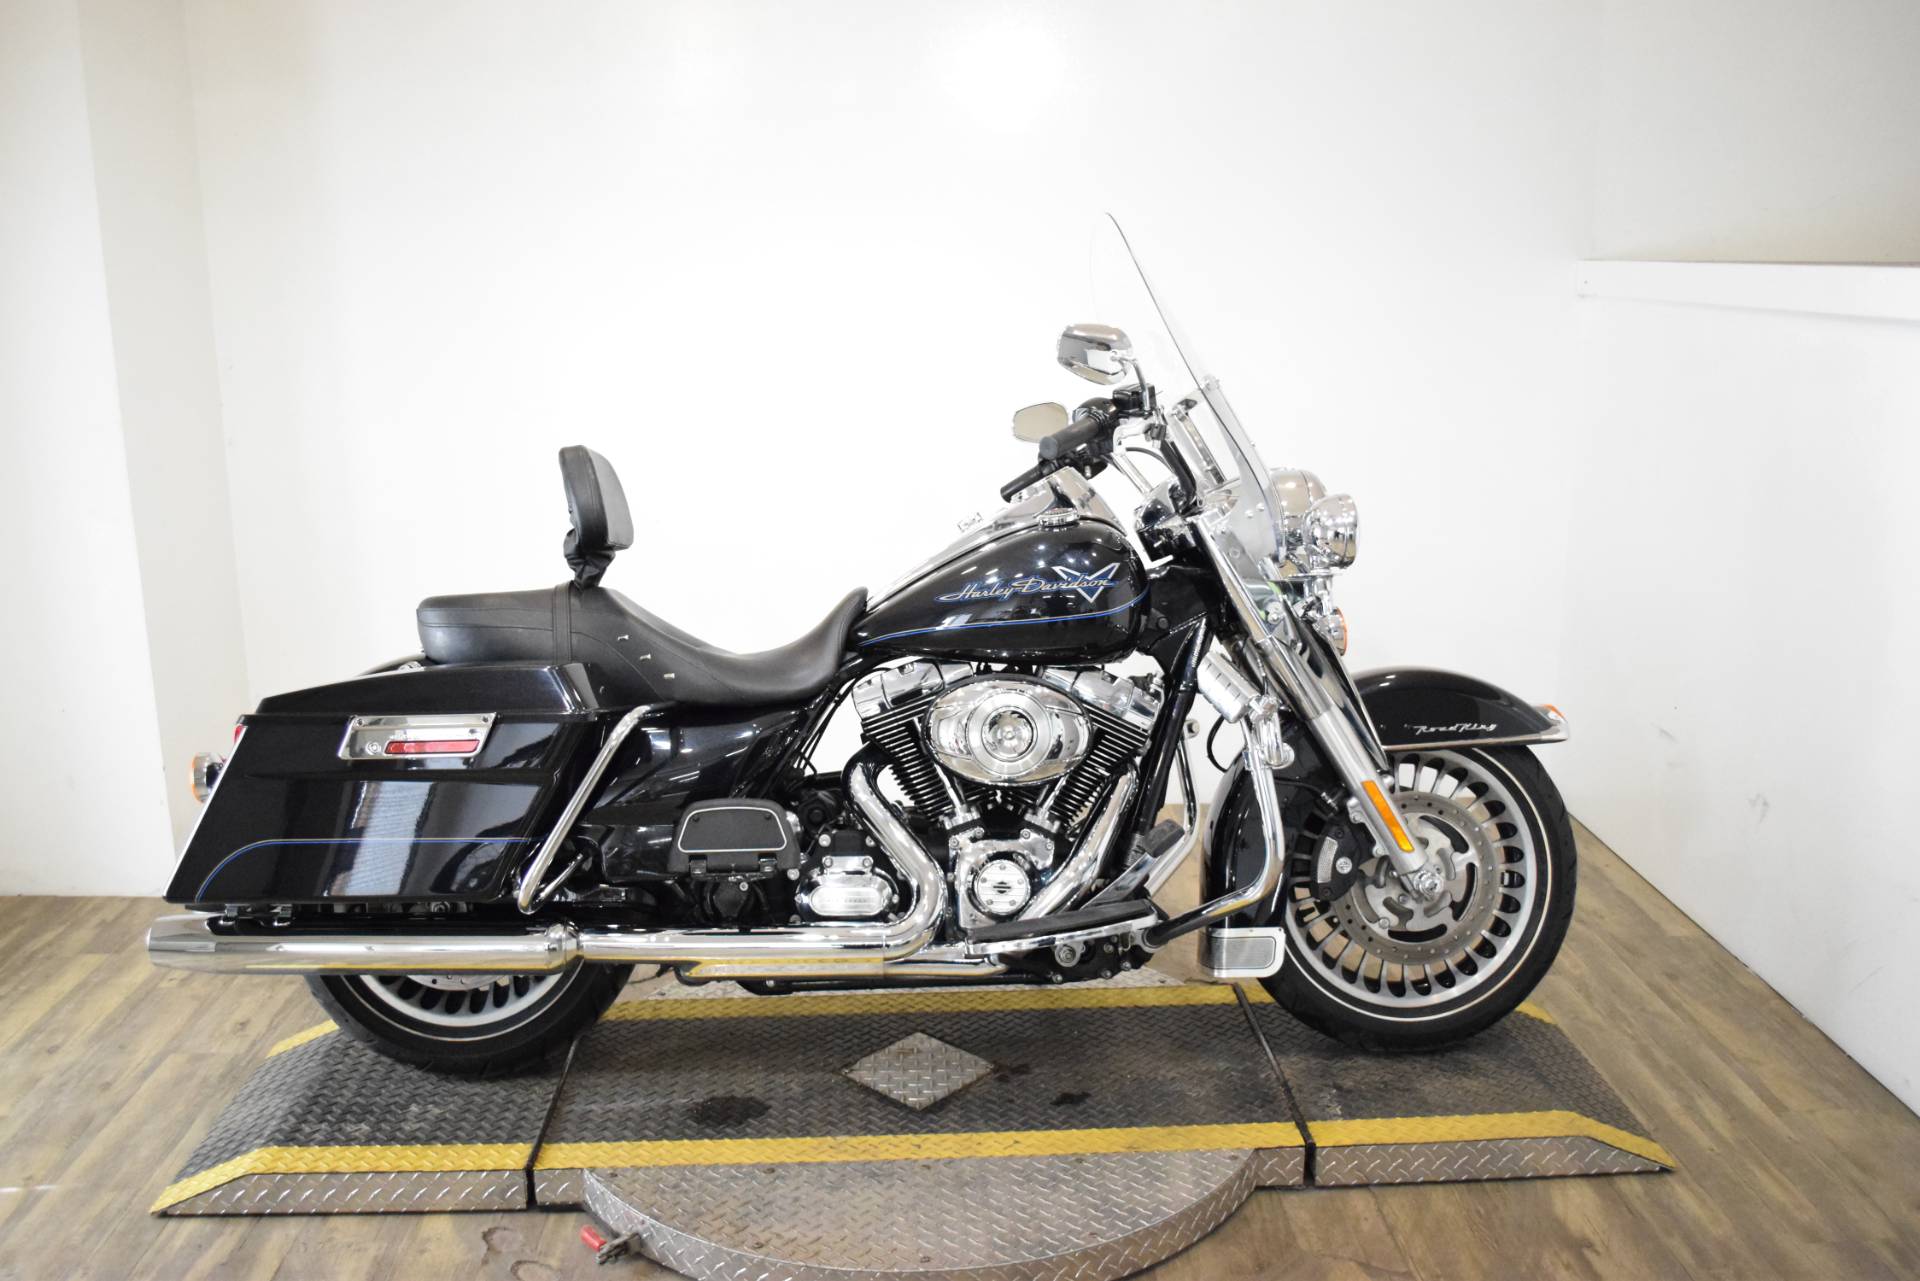 2013 Harley Davidson Road King Used Motorcycle For Sale Wauconda Illinois